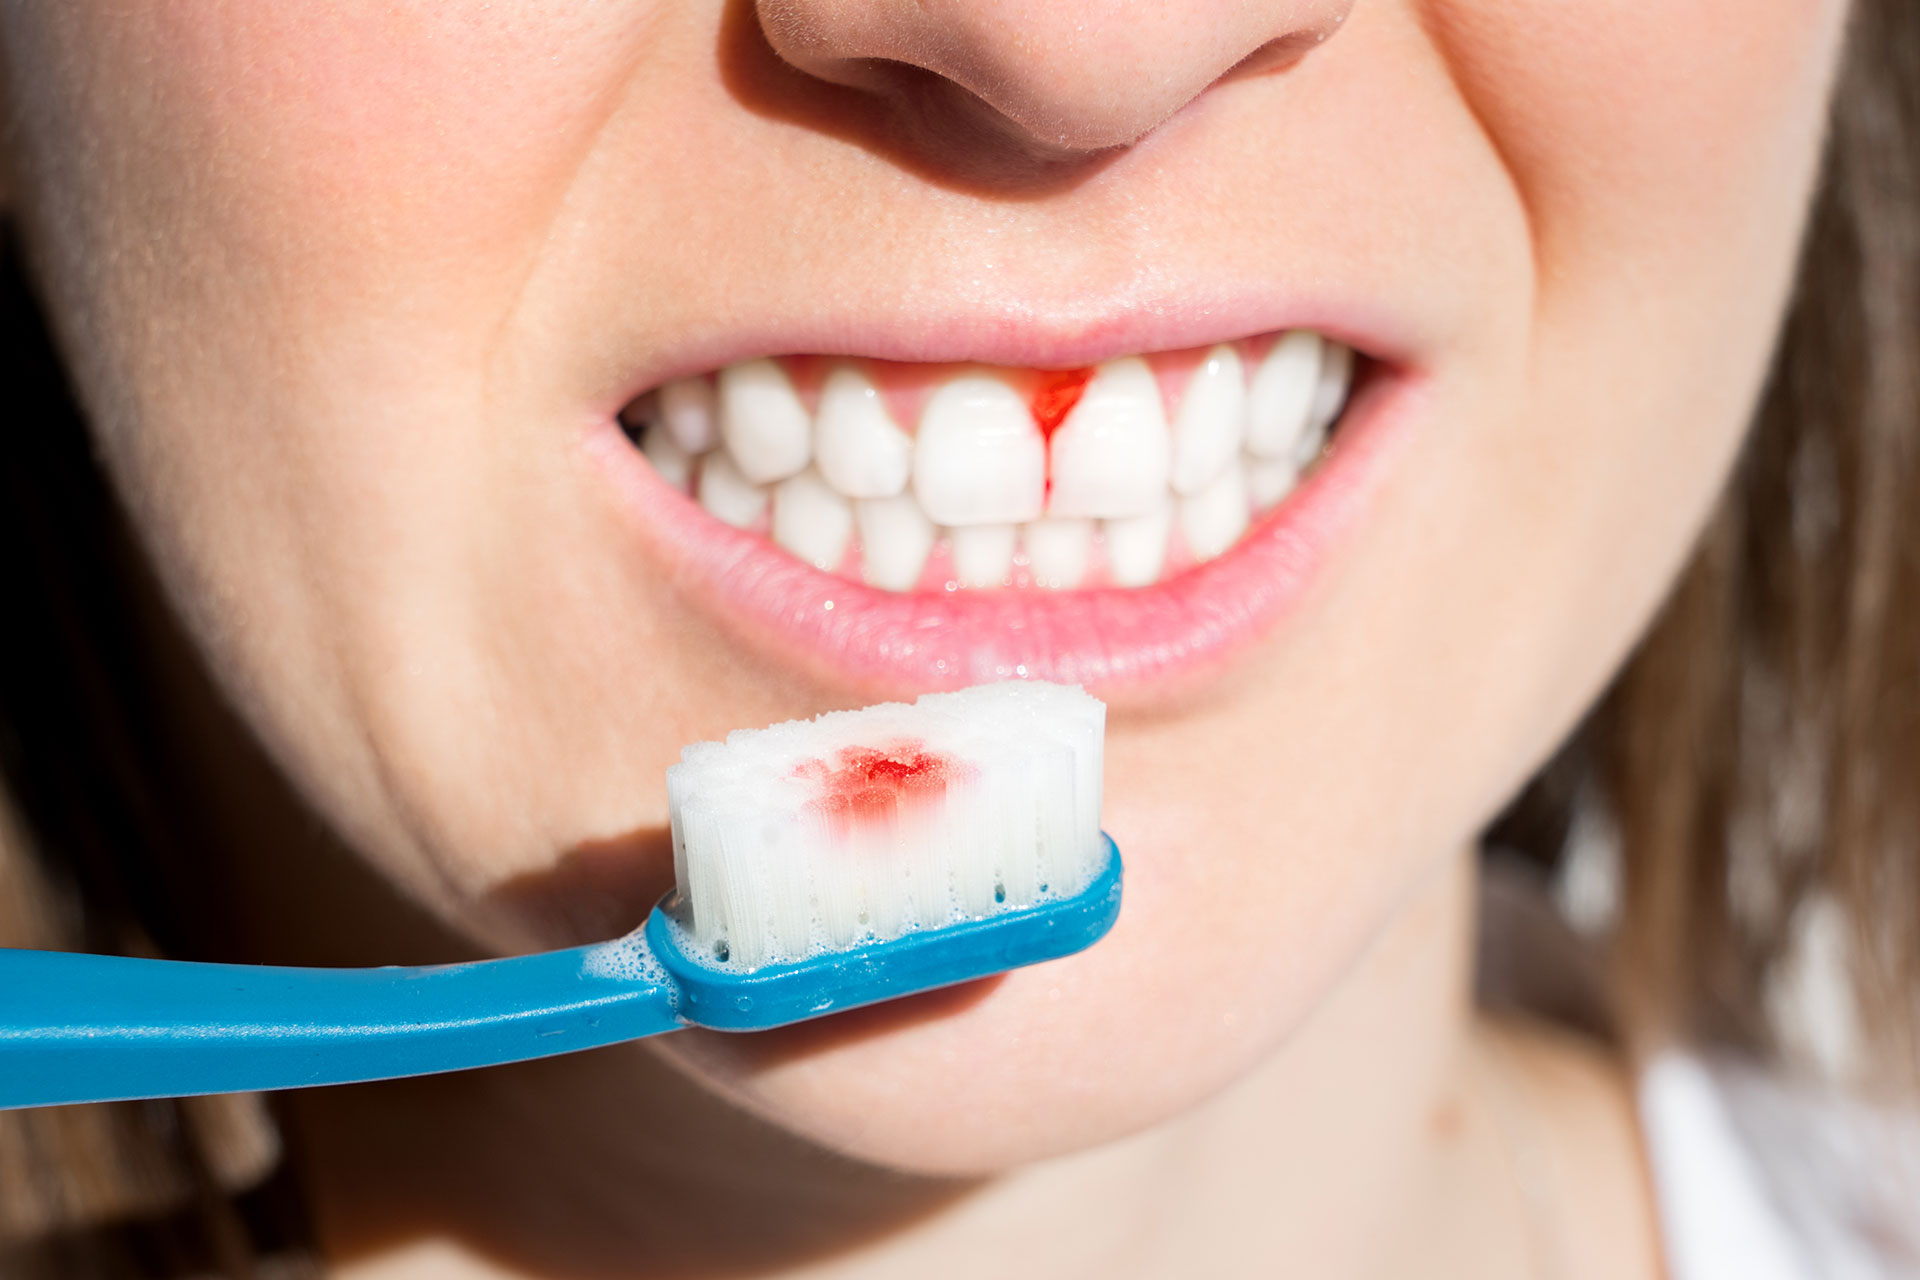 Are Bleeding Gums a Dental Emergency? Understanding, Identifying, and Managing